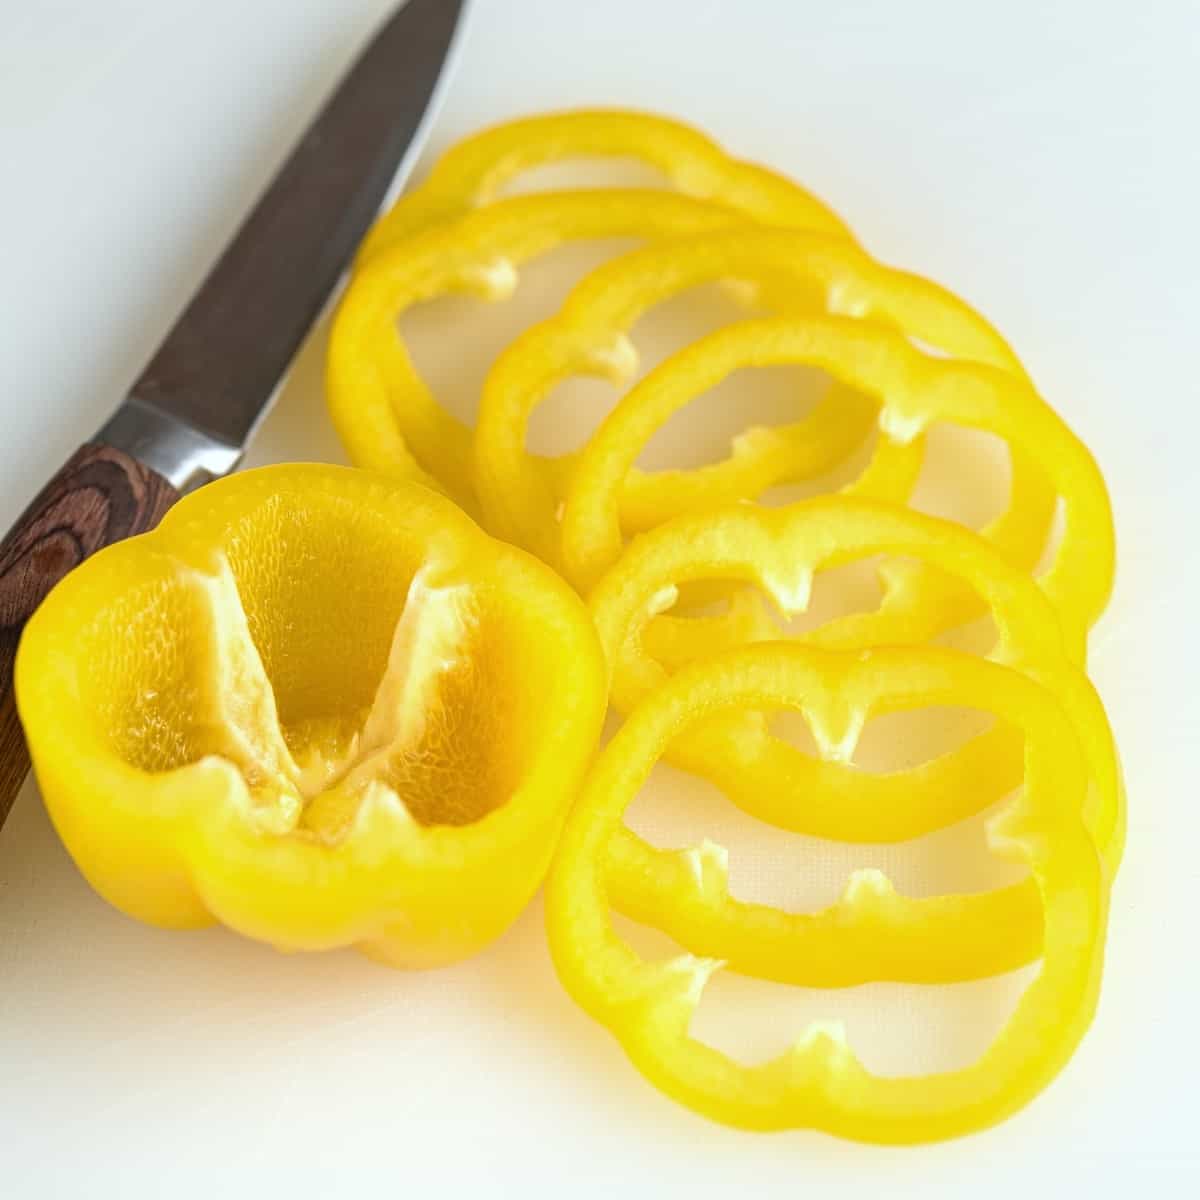 Yellow bell pepper sliced into rings.